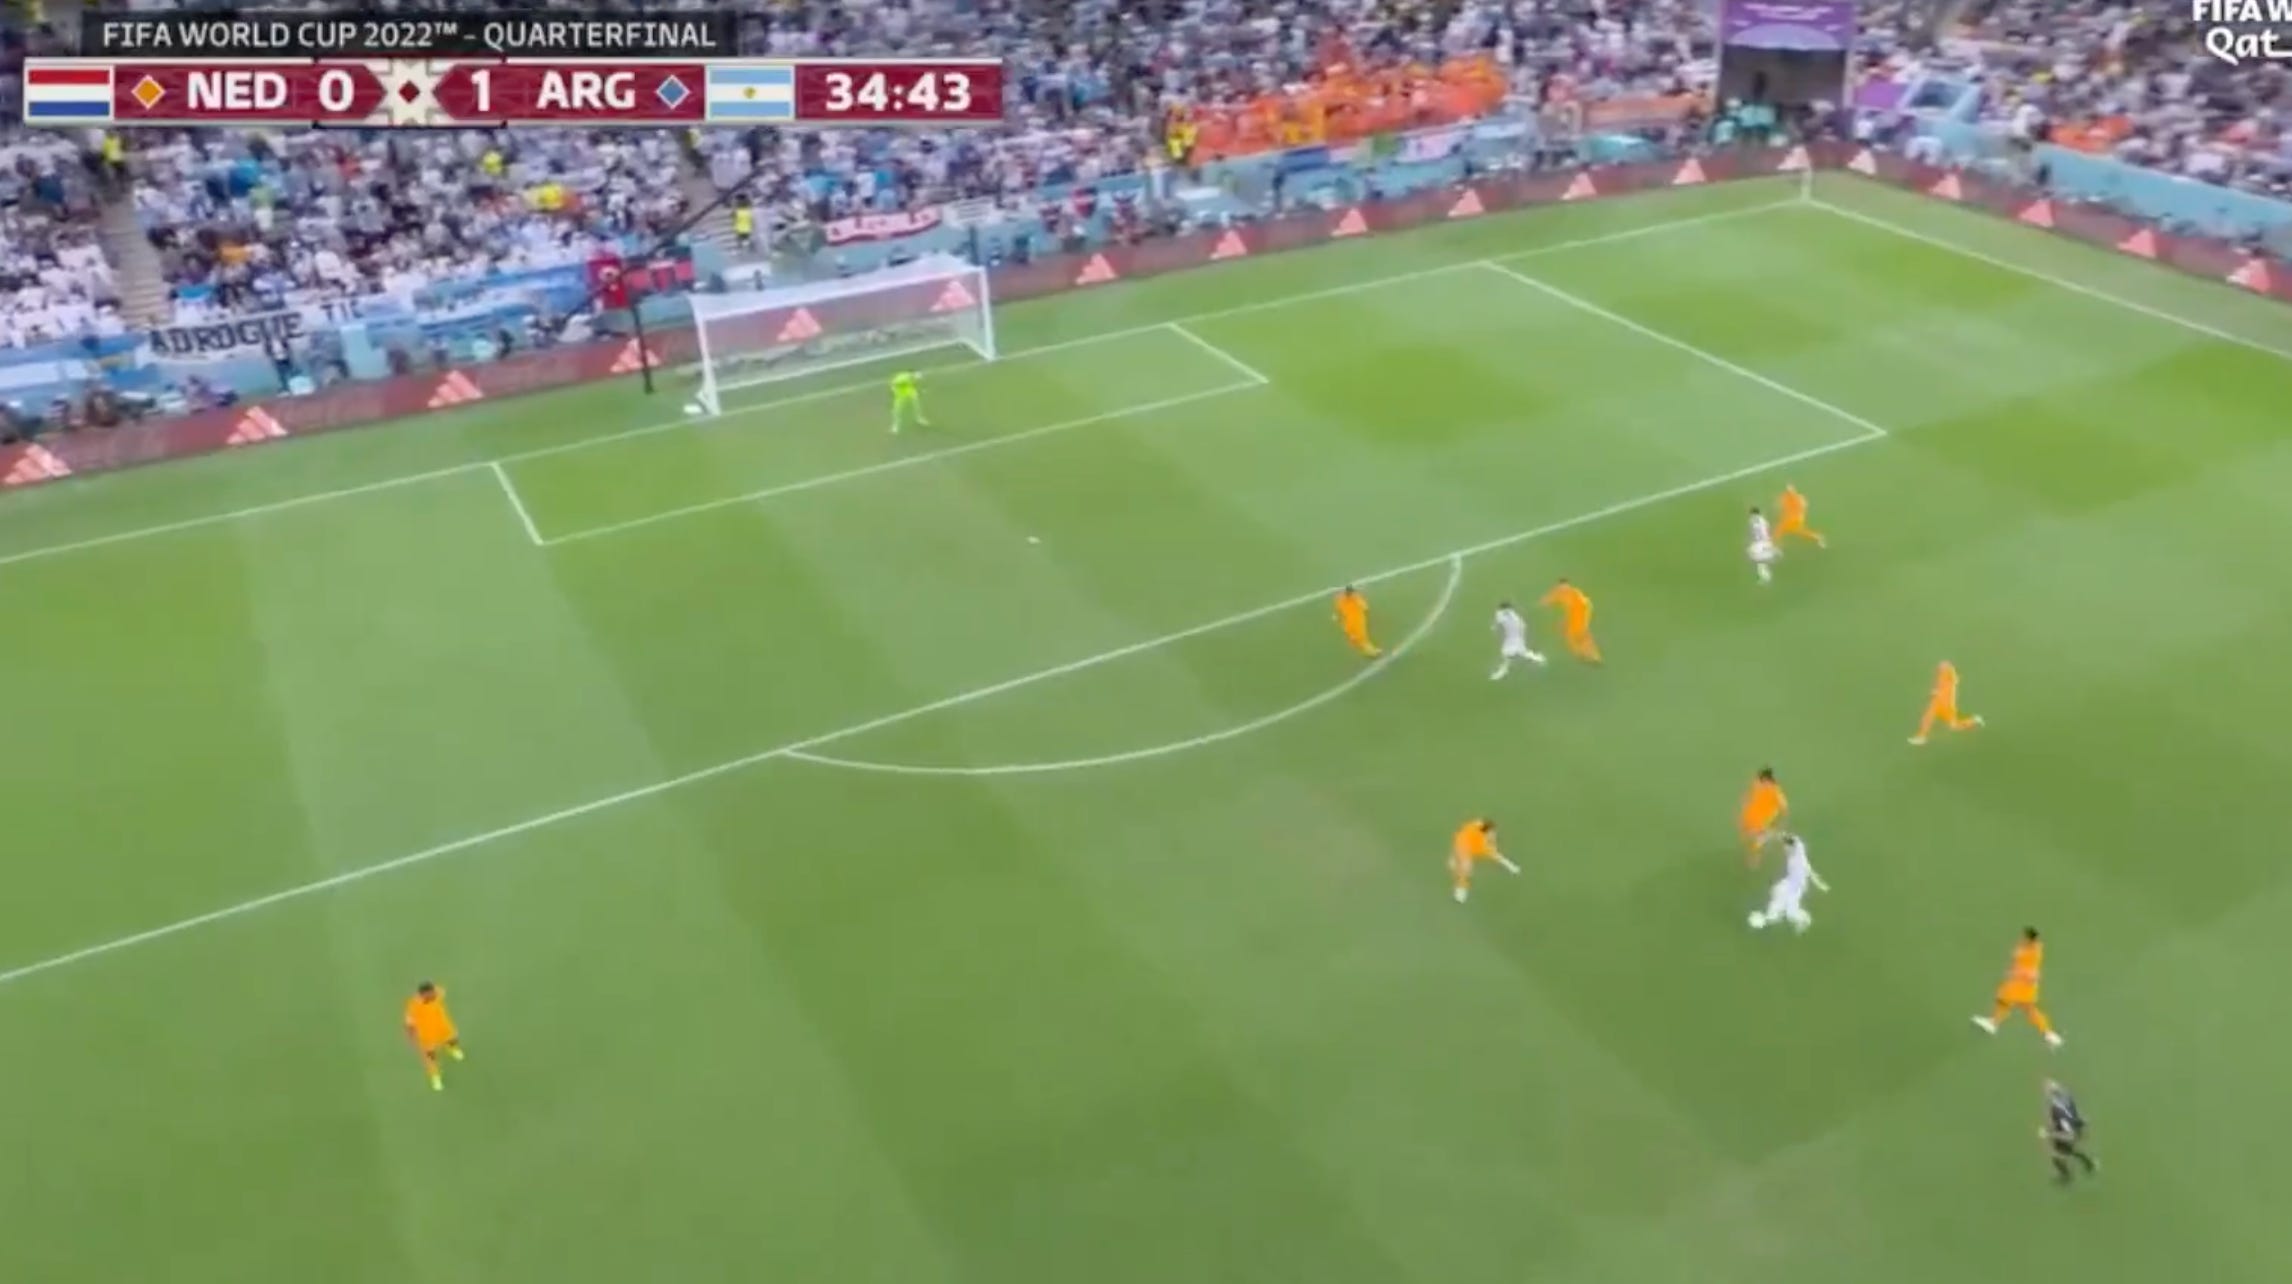 Messi has amazing assist vs. Netherlands at World Cup